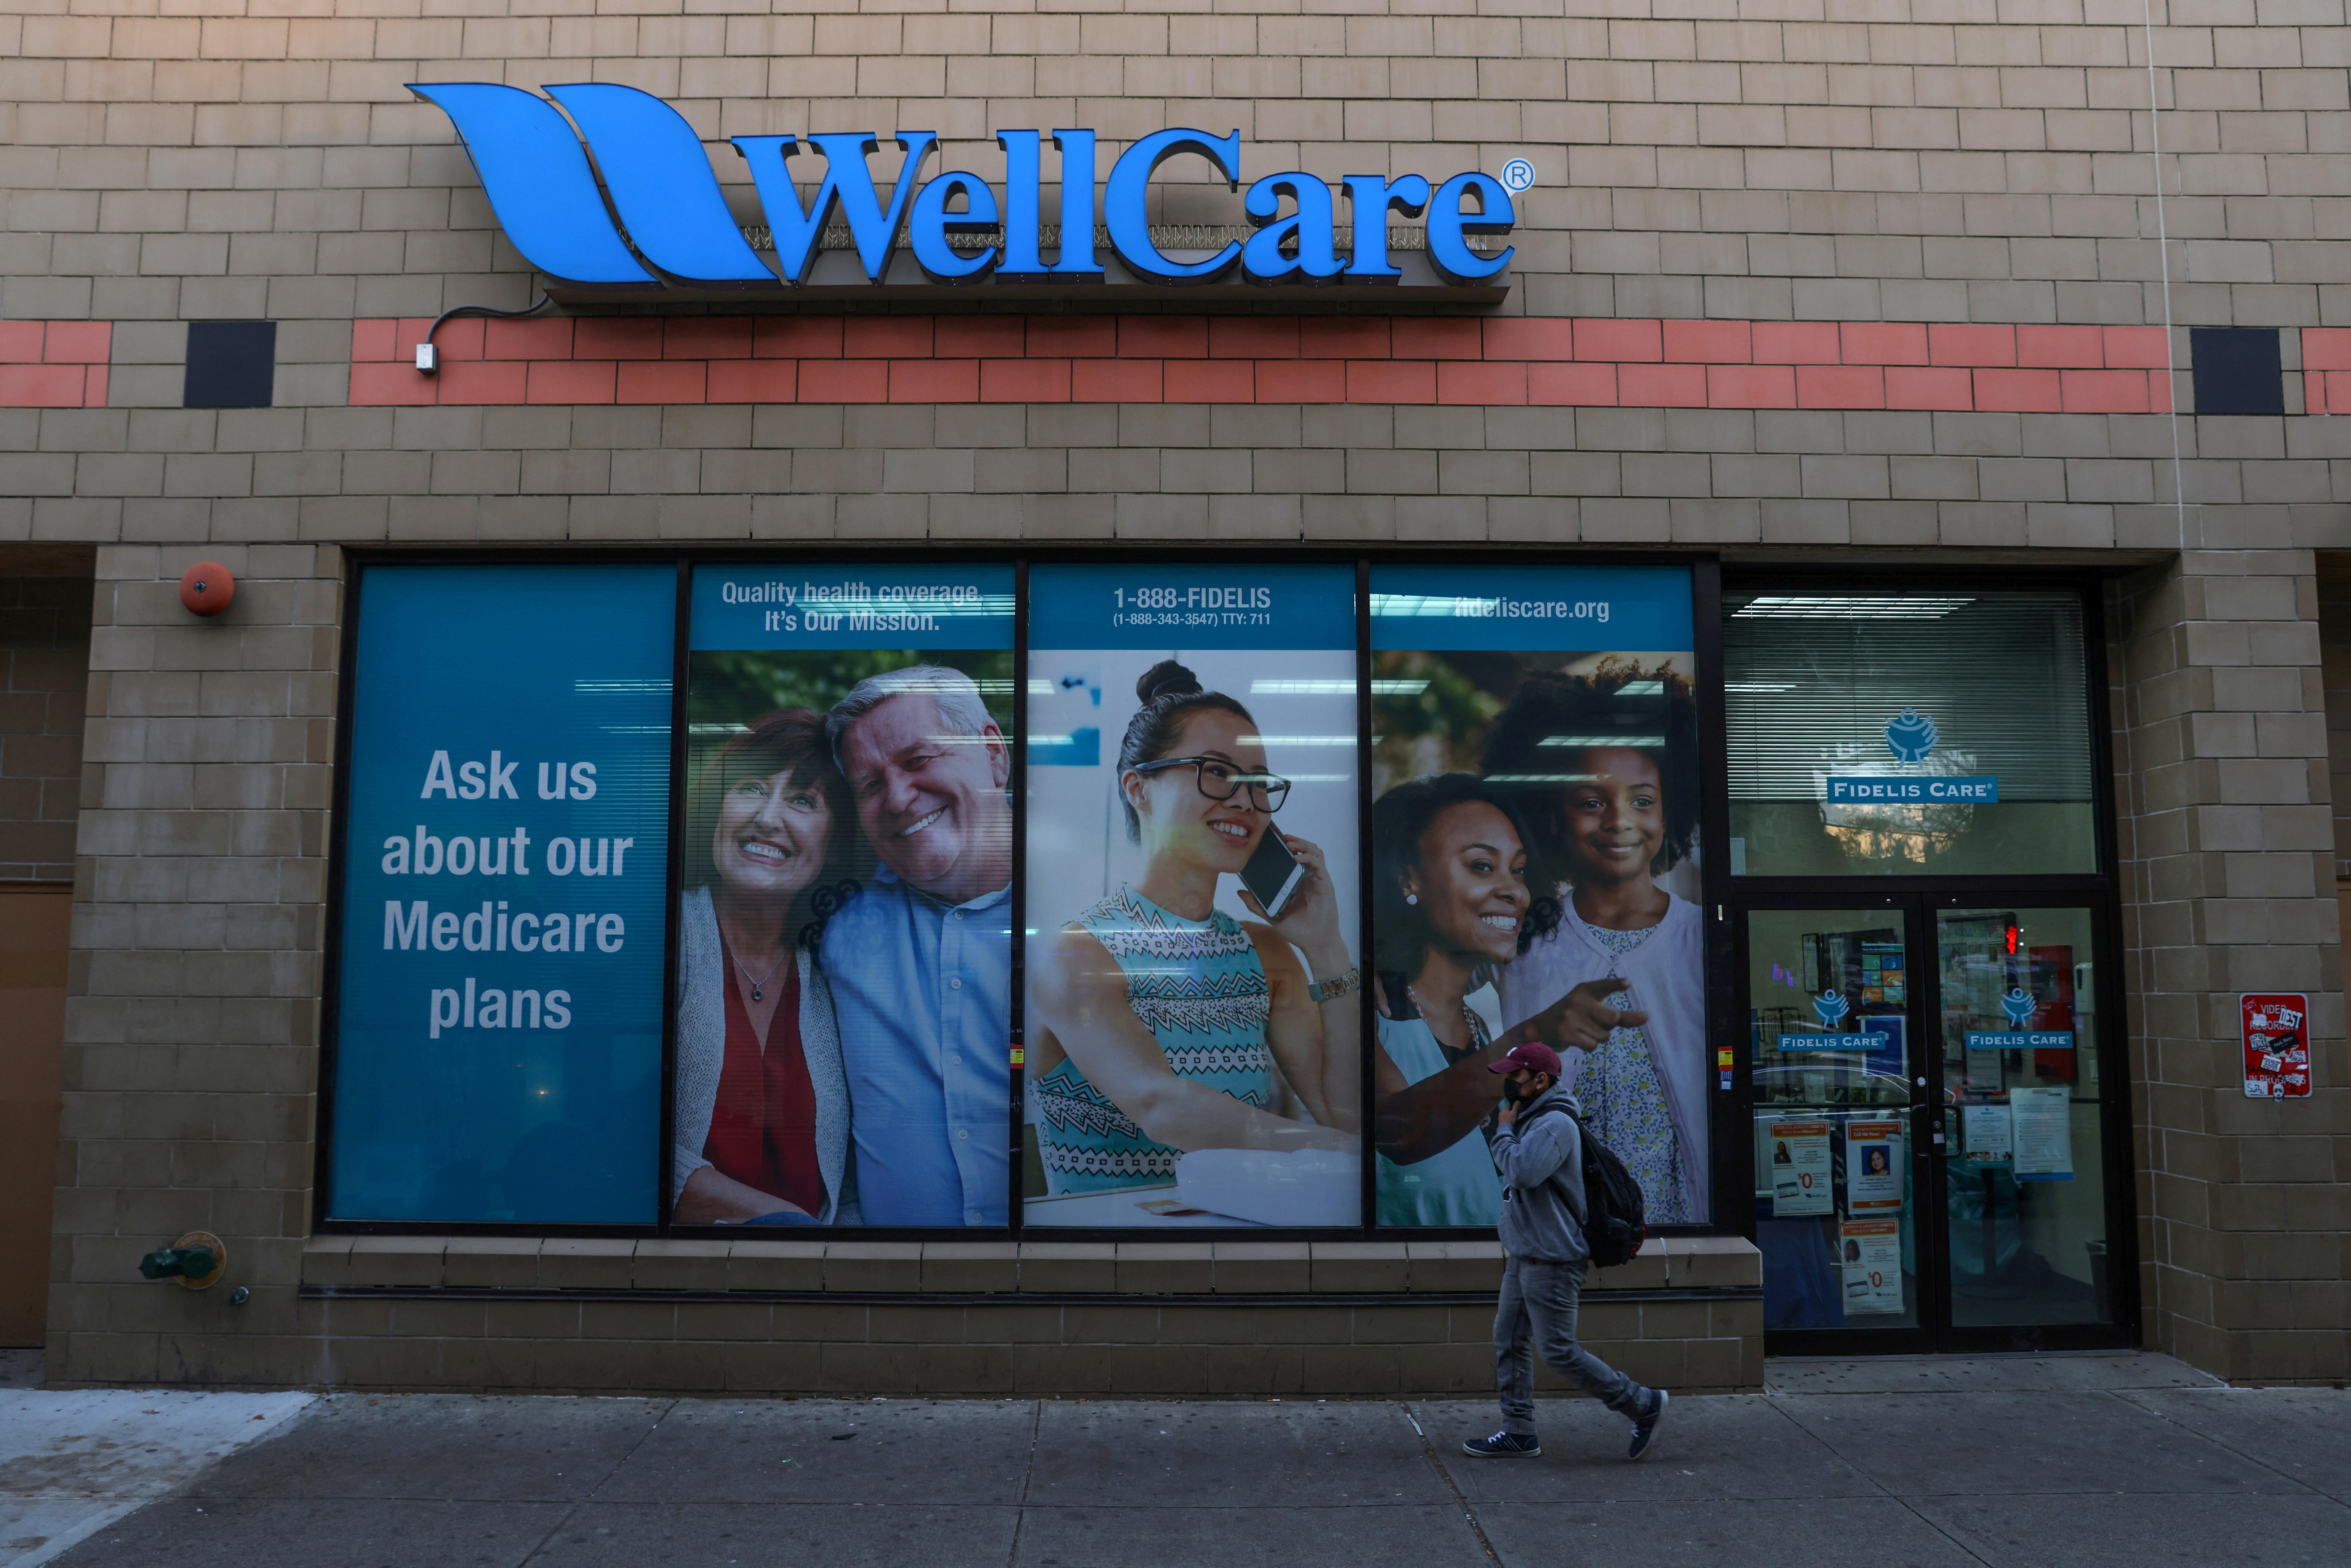 A person walks by a Wellcare and Fidelis Care location, part of the Centene Corporation, in Queens, New York